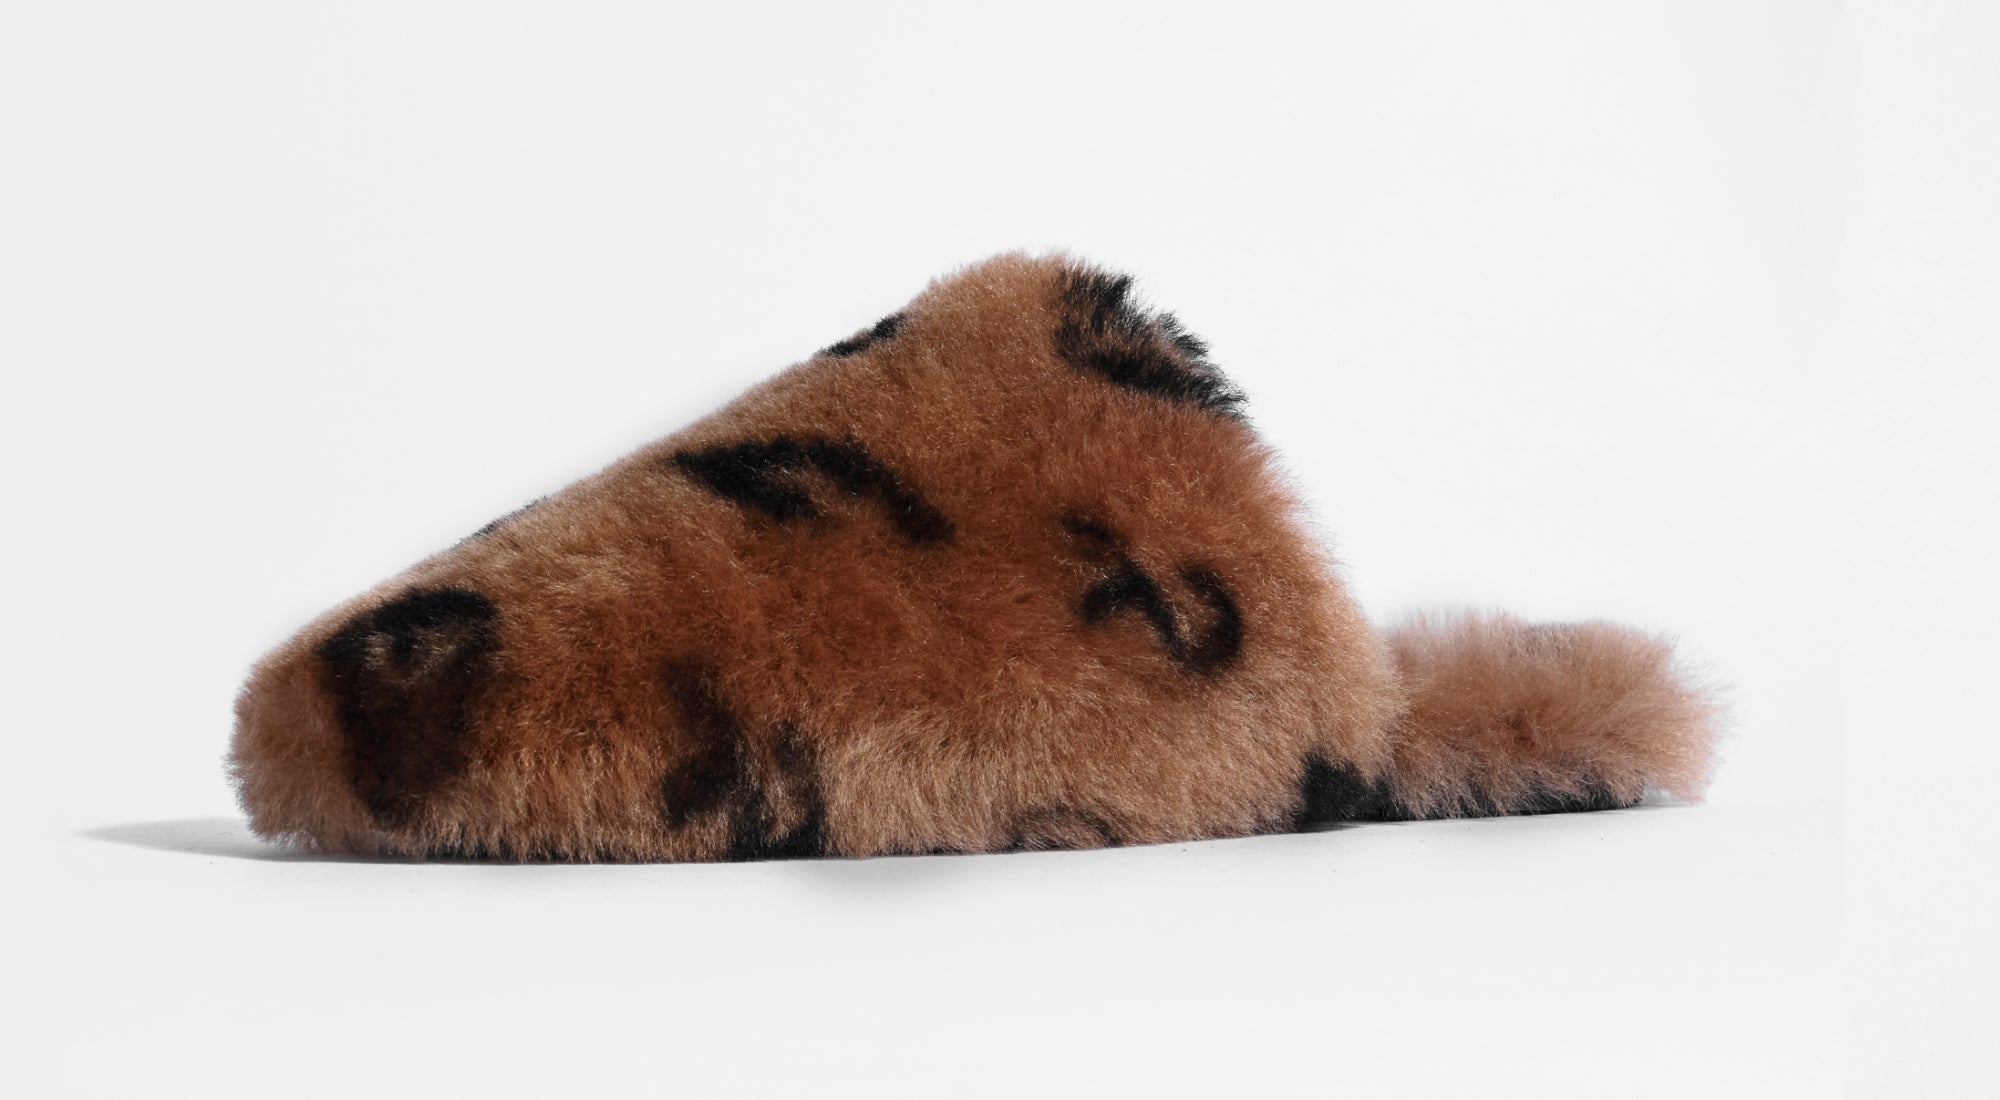 HOME EVERYWHERE SHEARLING SLIPPERS - CHOCOLATE BROWN